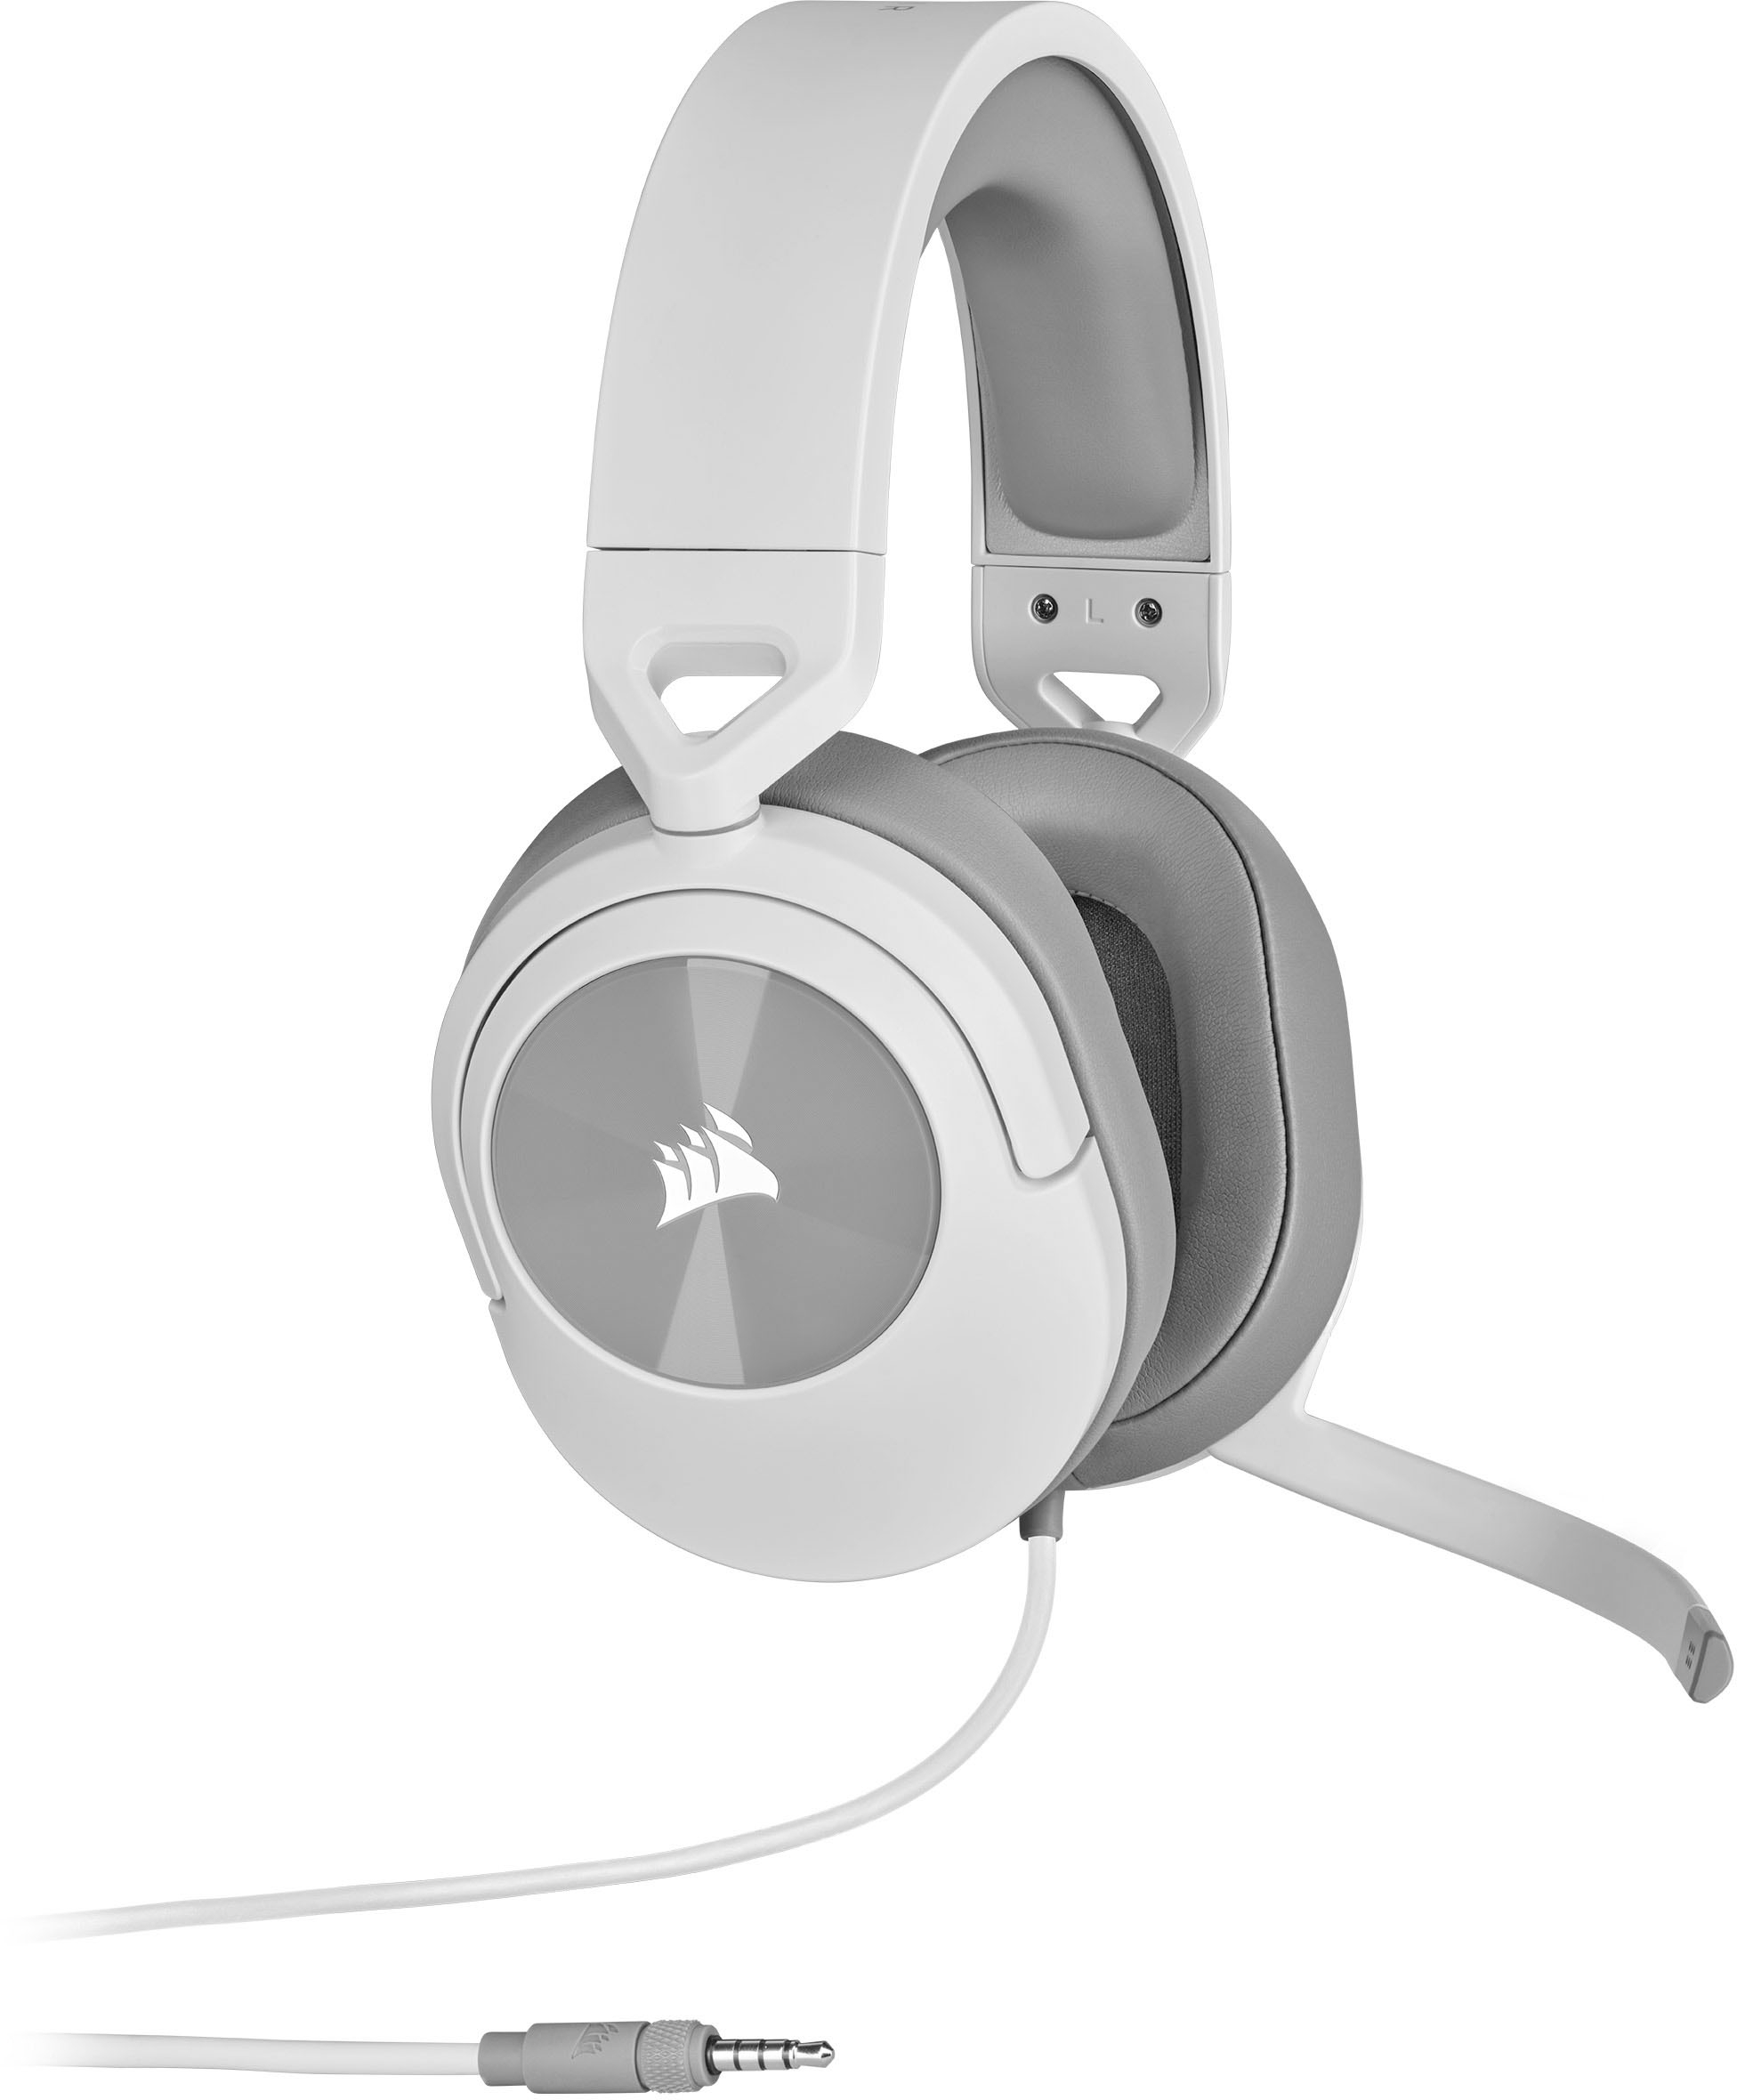 Angle View: CORSAIR - HS55 STEREO Wired Gaming Headset for PC, PS5, and PS4 with Omni-Directional Microphone - White